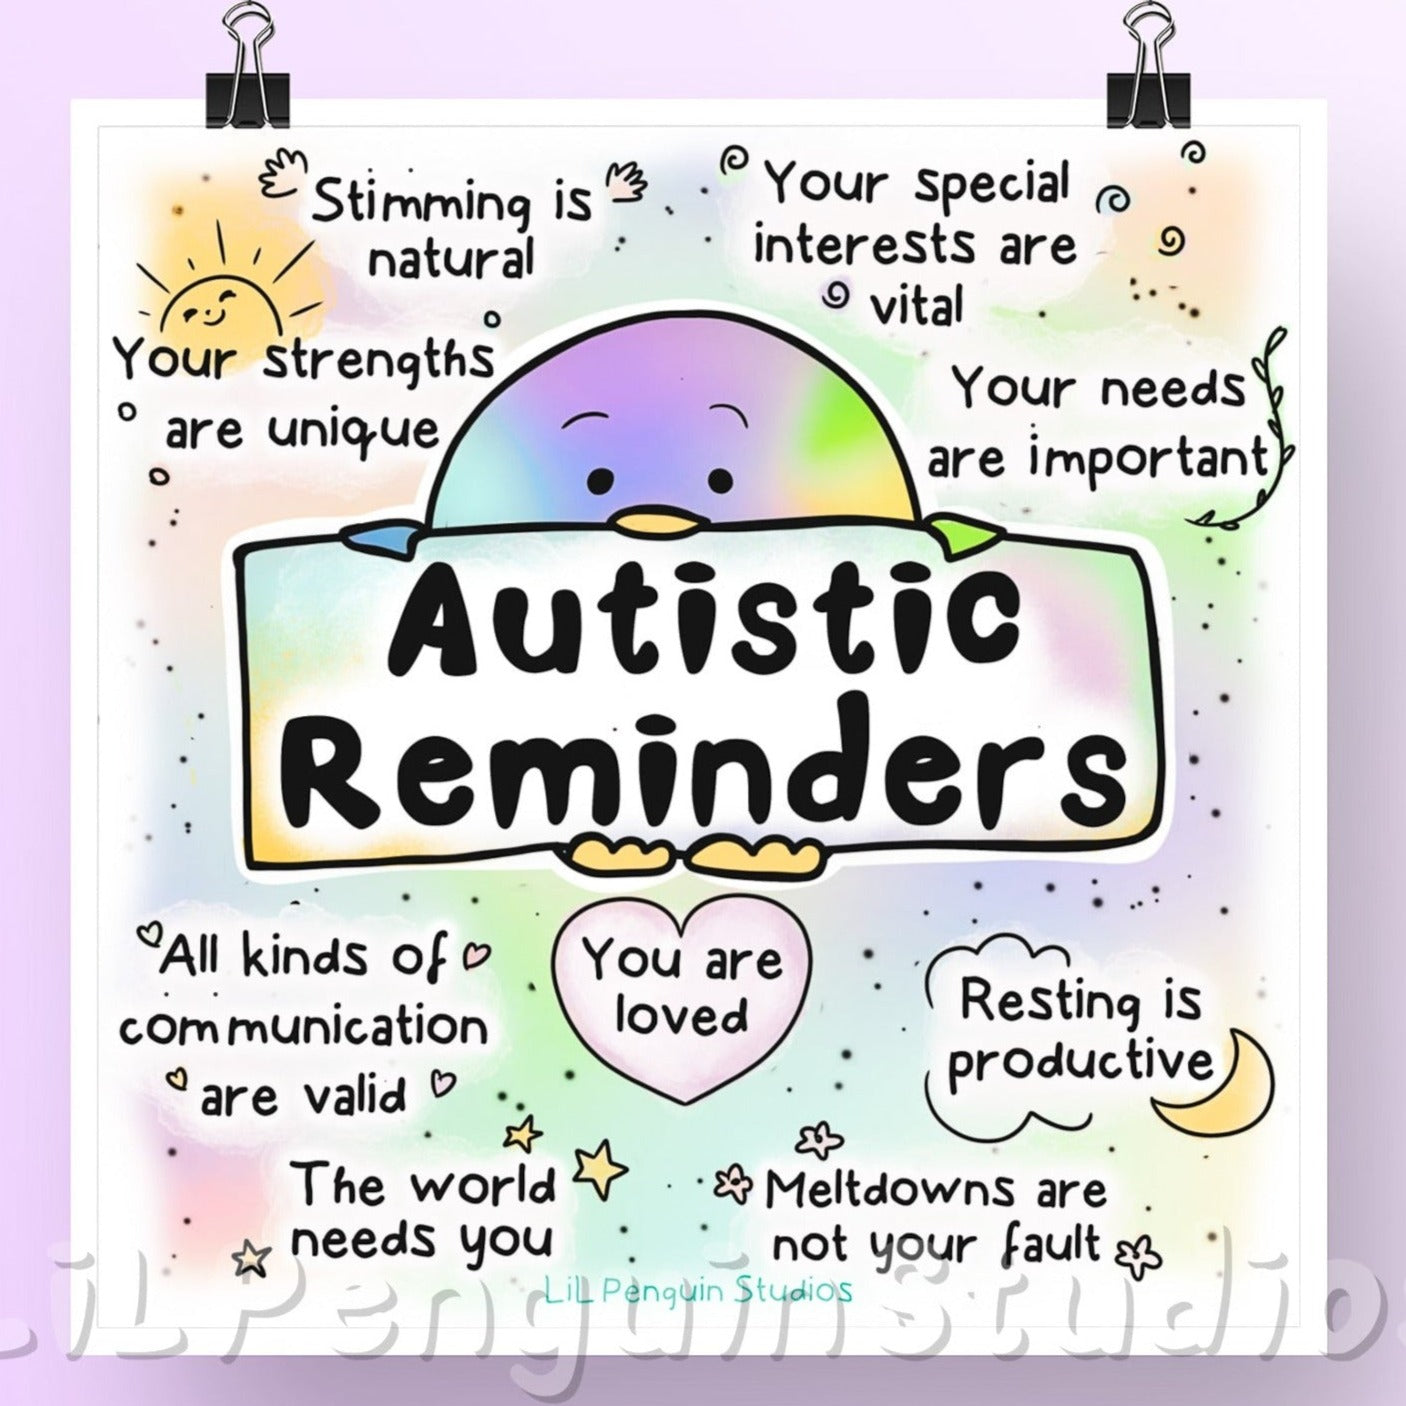 Square Autism Poster (Digital Download only). Autistic reminders. Stimming is natural Your special interests are vital Your strengths are unique Your needs are important All kinds of communication are valid Resting is productive Meltdowns are not your fault You are loved The world needs you